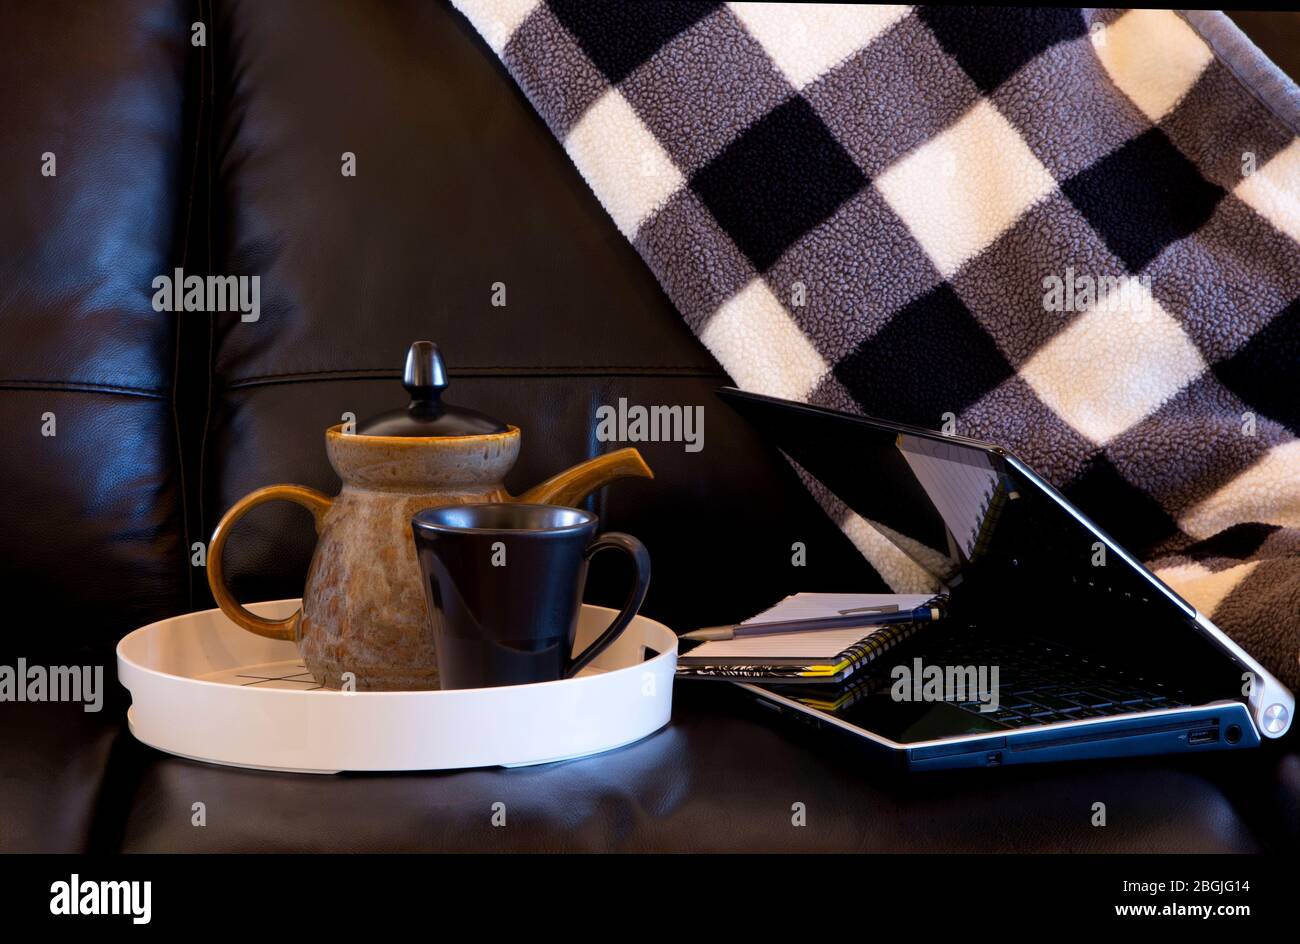 Working at home on black leather sofa with tea cup, tea pot, laptop, notebook, and comfortable blanket Stock Photo